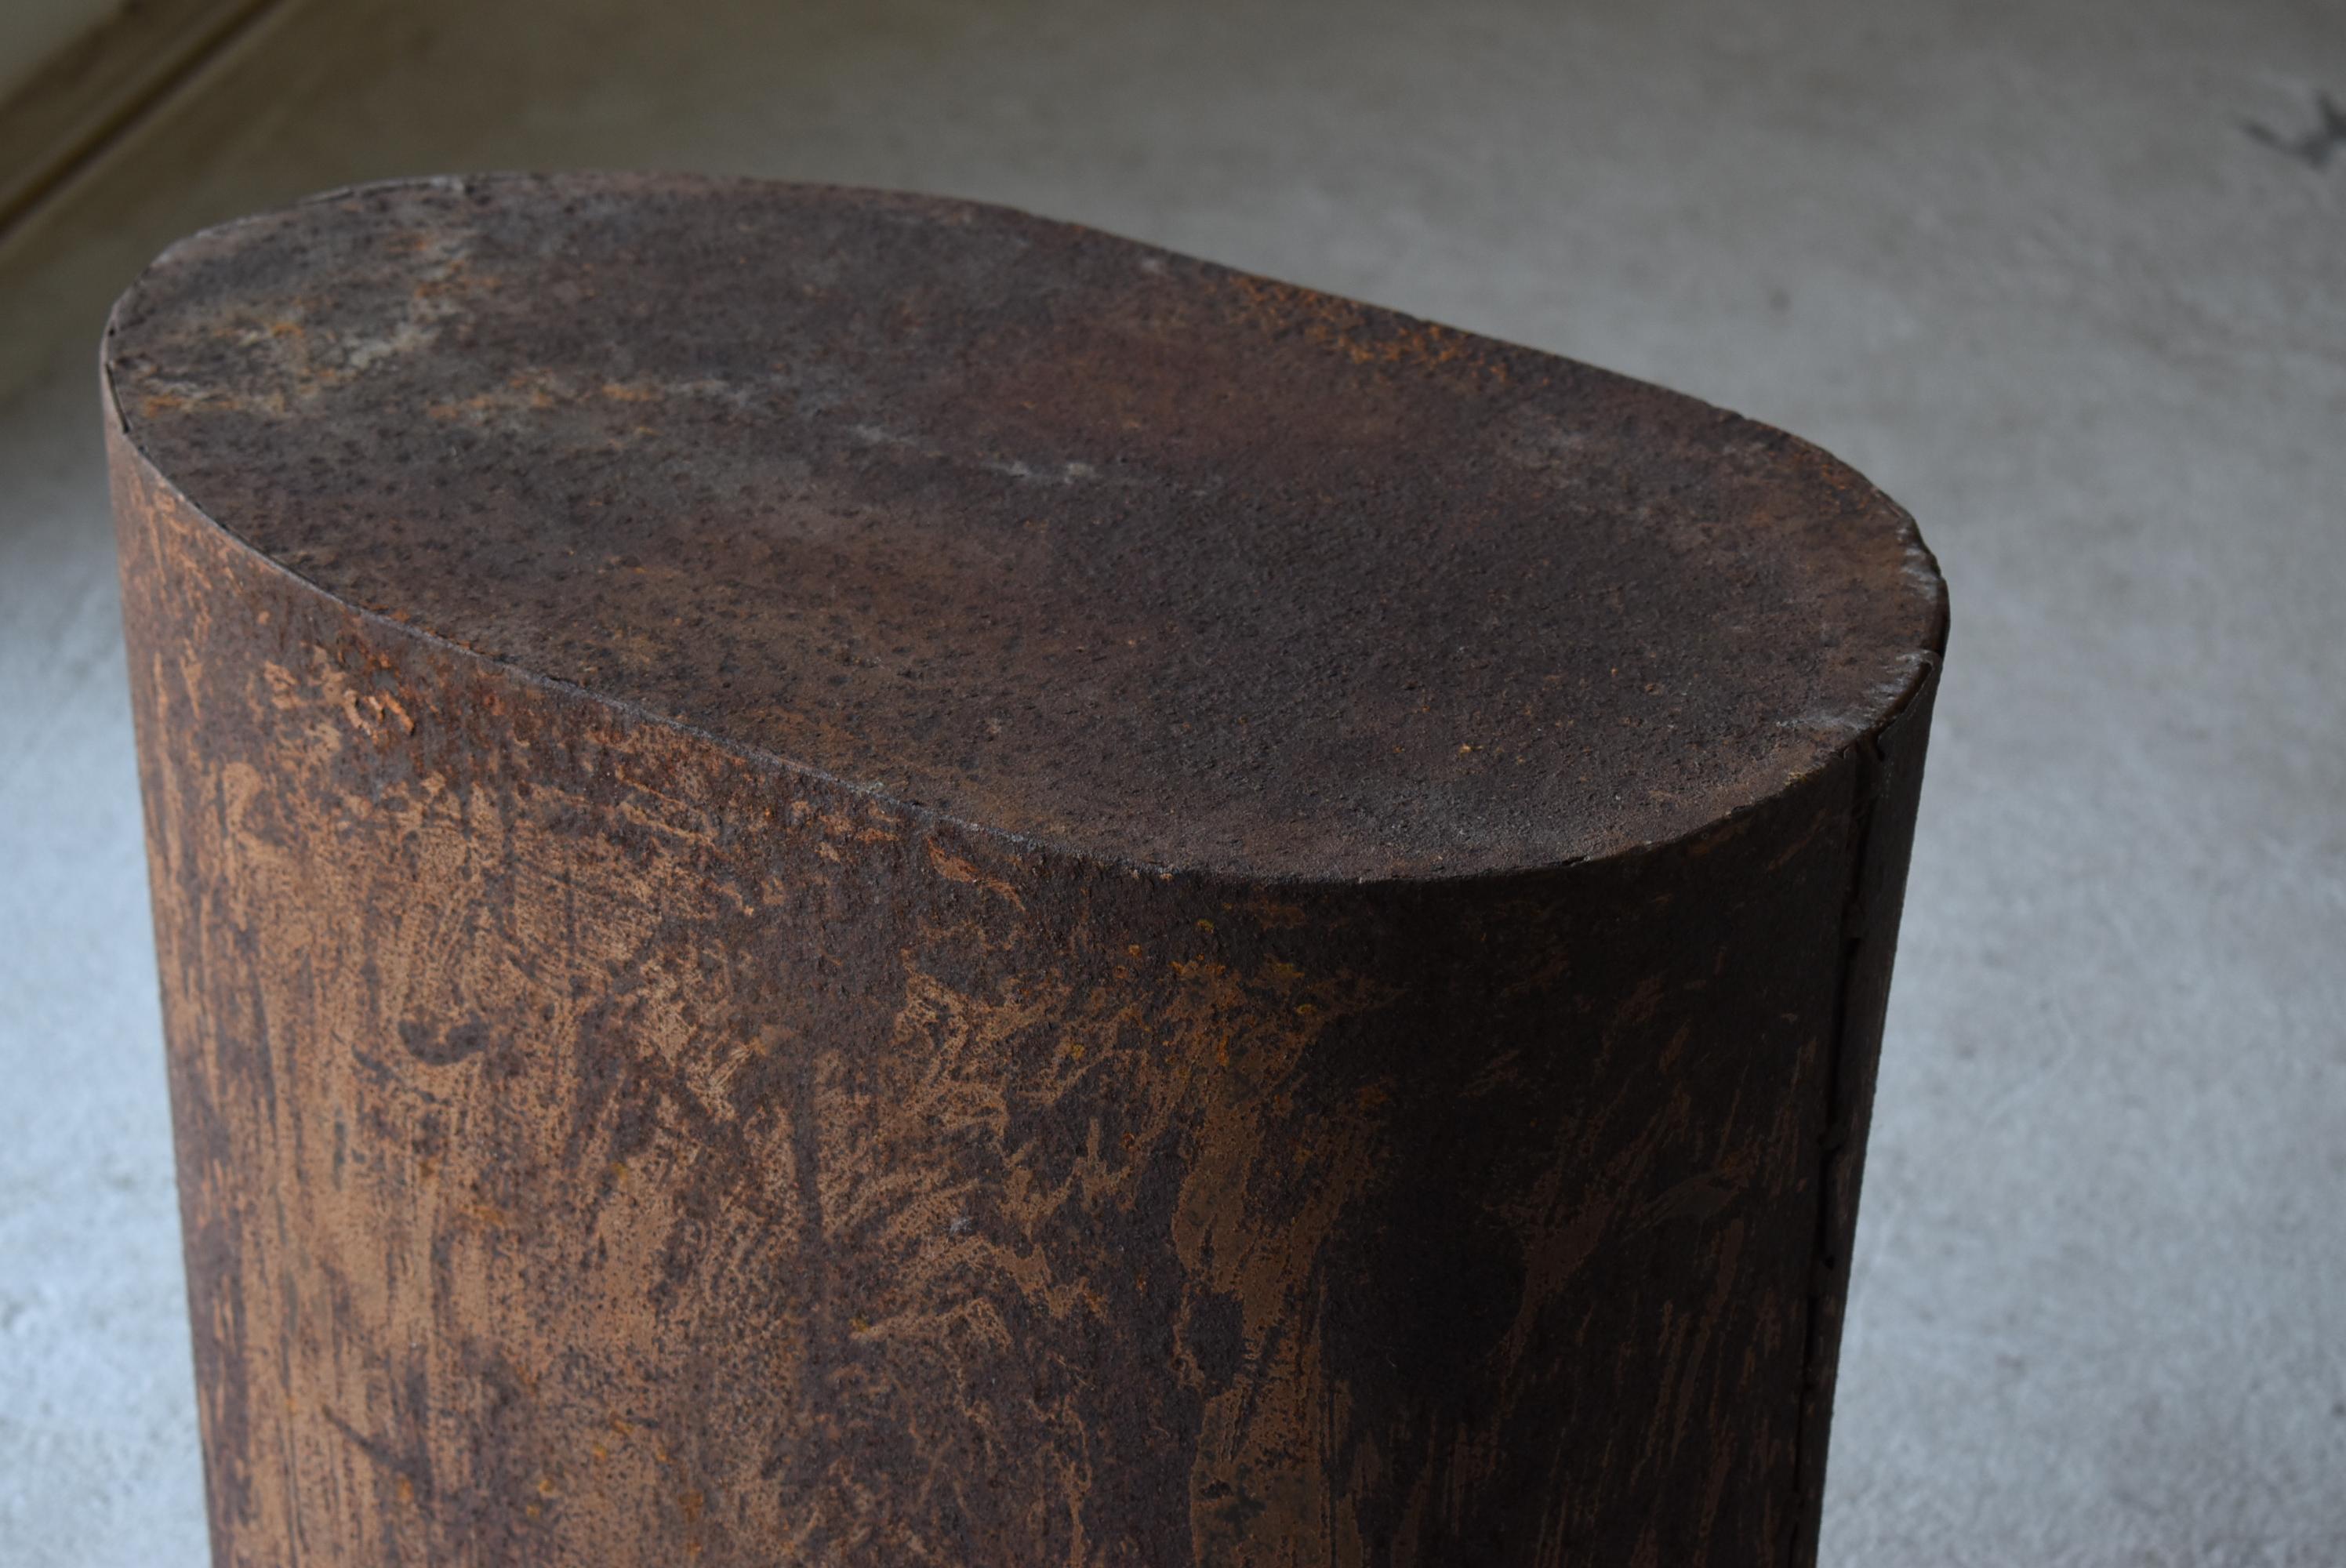 Mid-20th Century Japanese Old Iron Exhibition Stand 1950s-1970s / Side Table Wabisabi